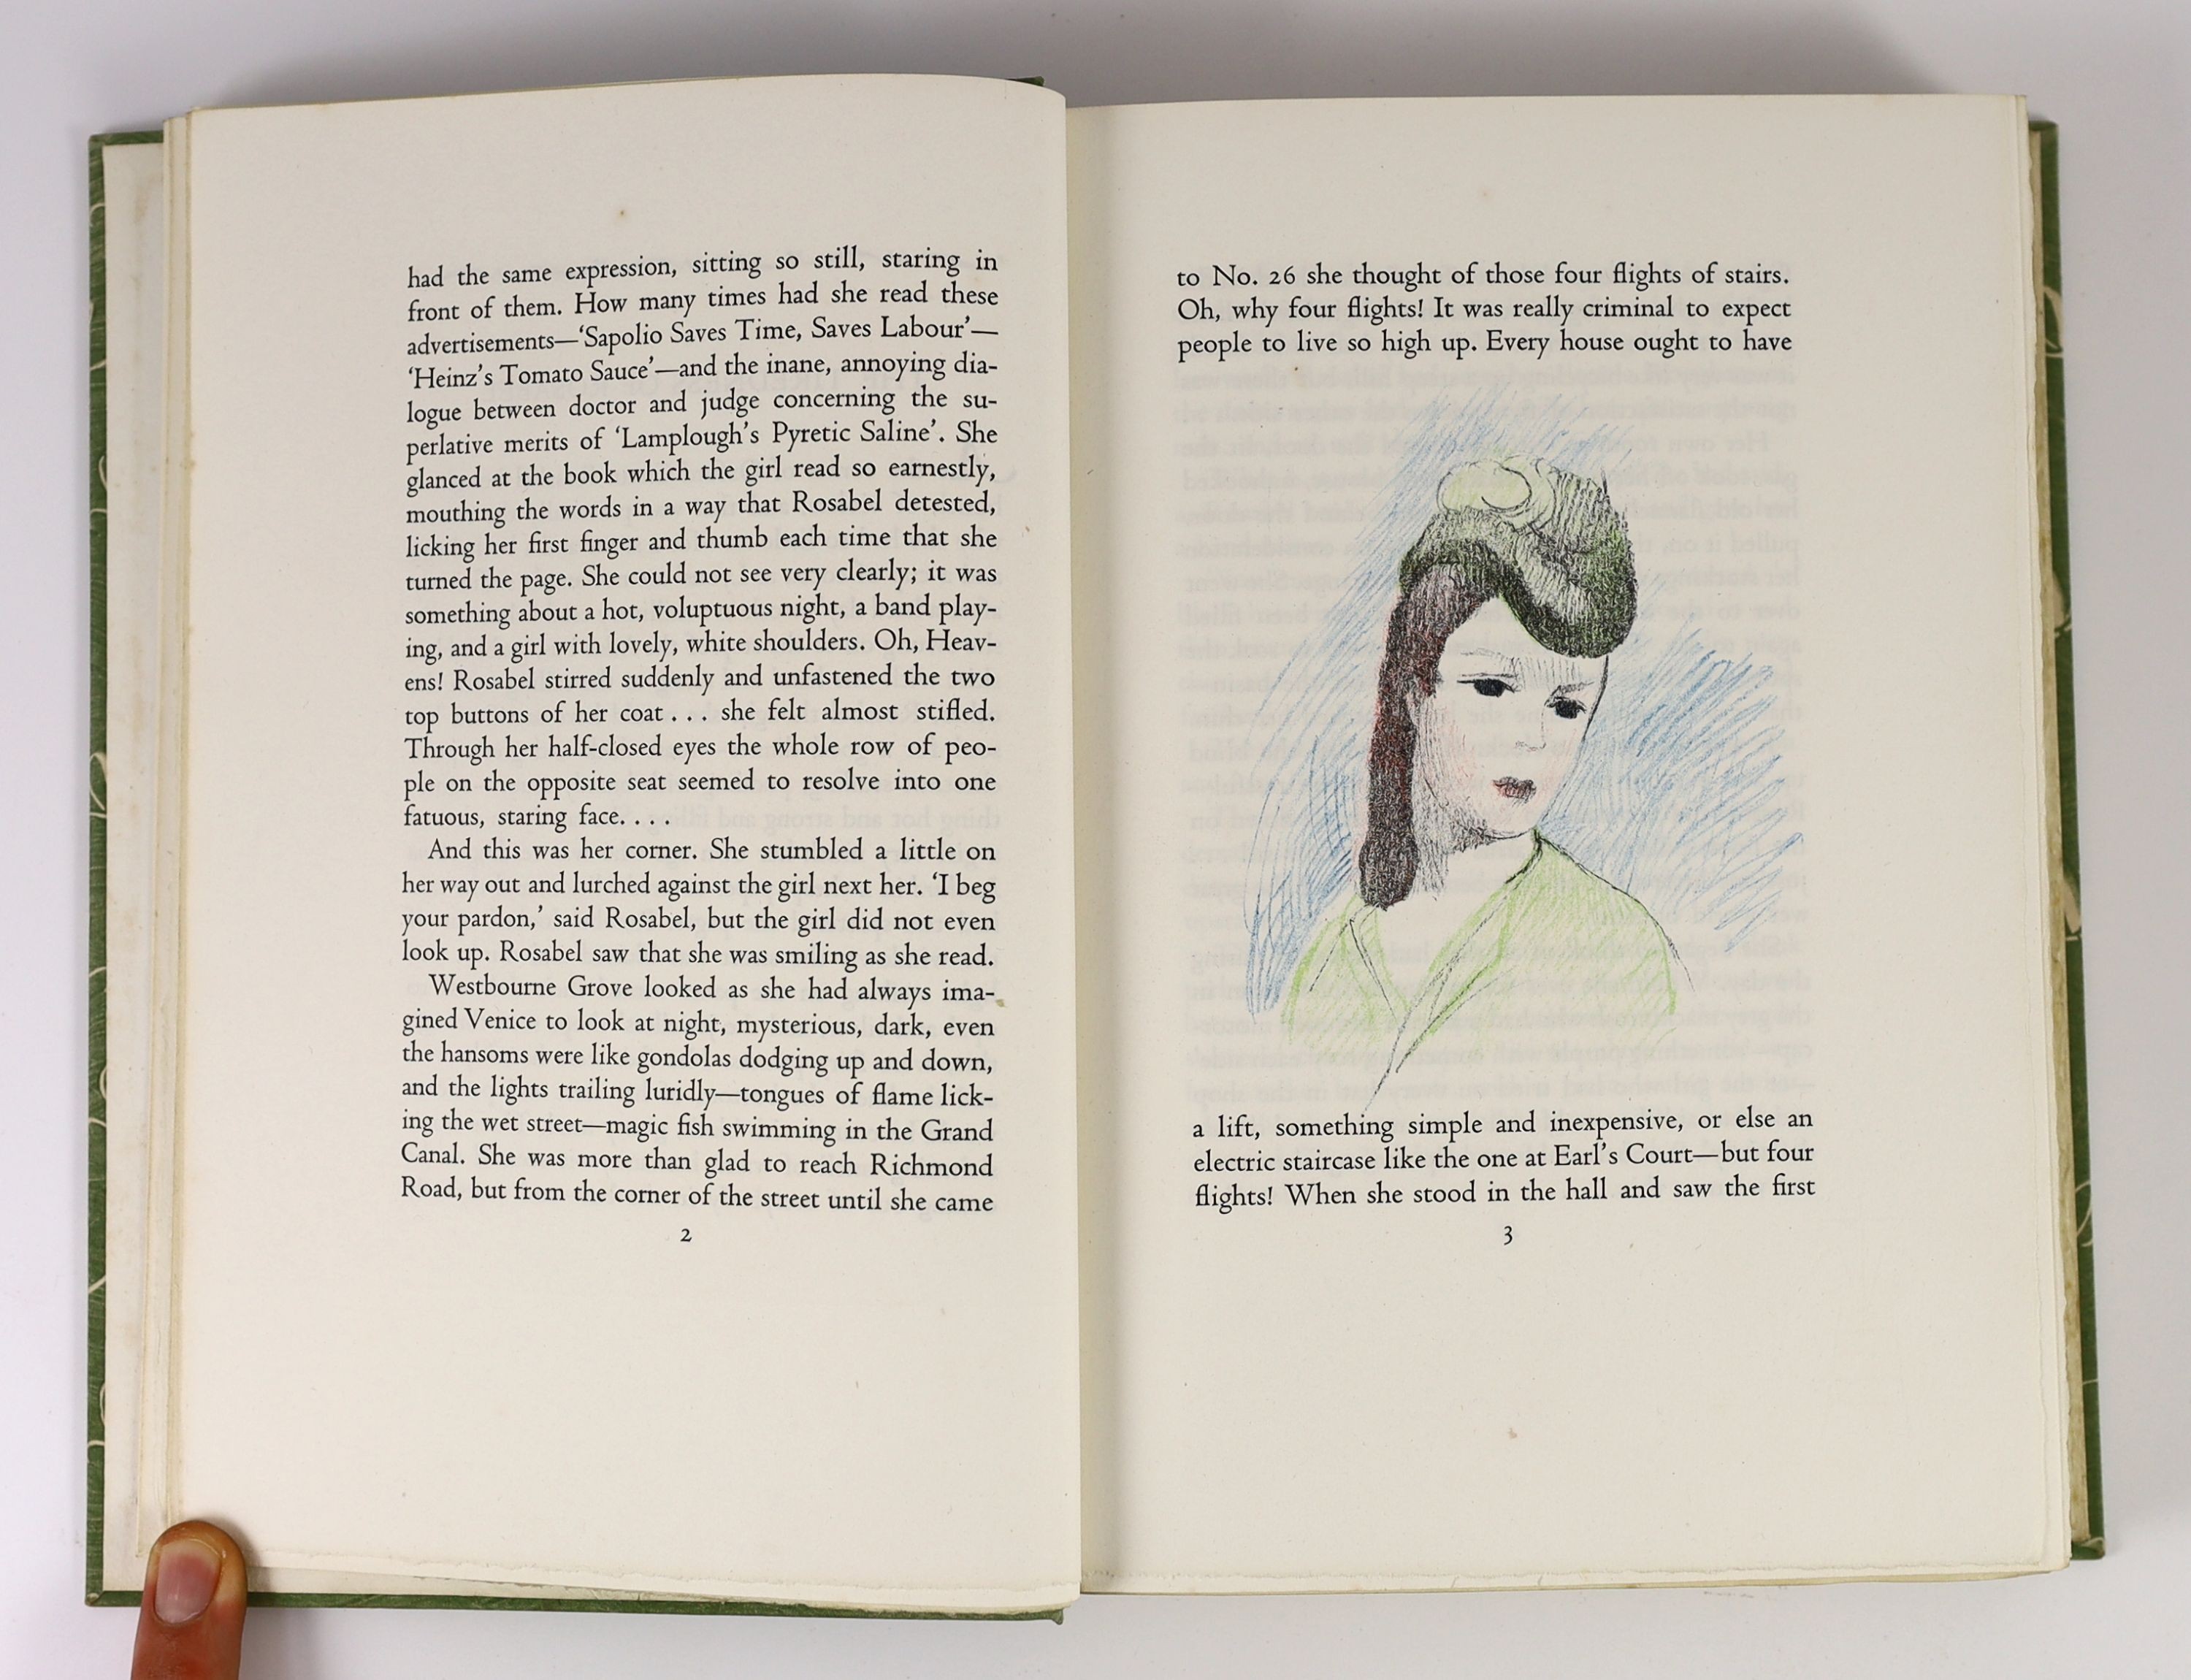 Mansfield, Katherine - The Garden Party, one of 1200, illustrated by Marie Laurencin, 4to, original green pastepaper over boards, with 16 coloured lithographs, Verona Press, London, 1939